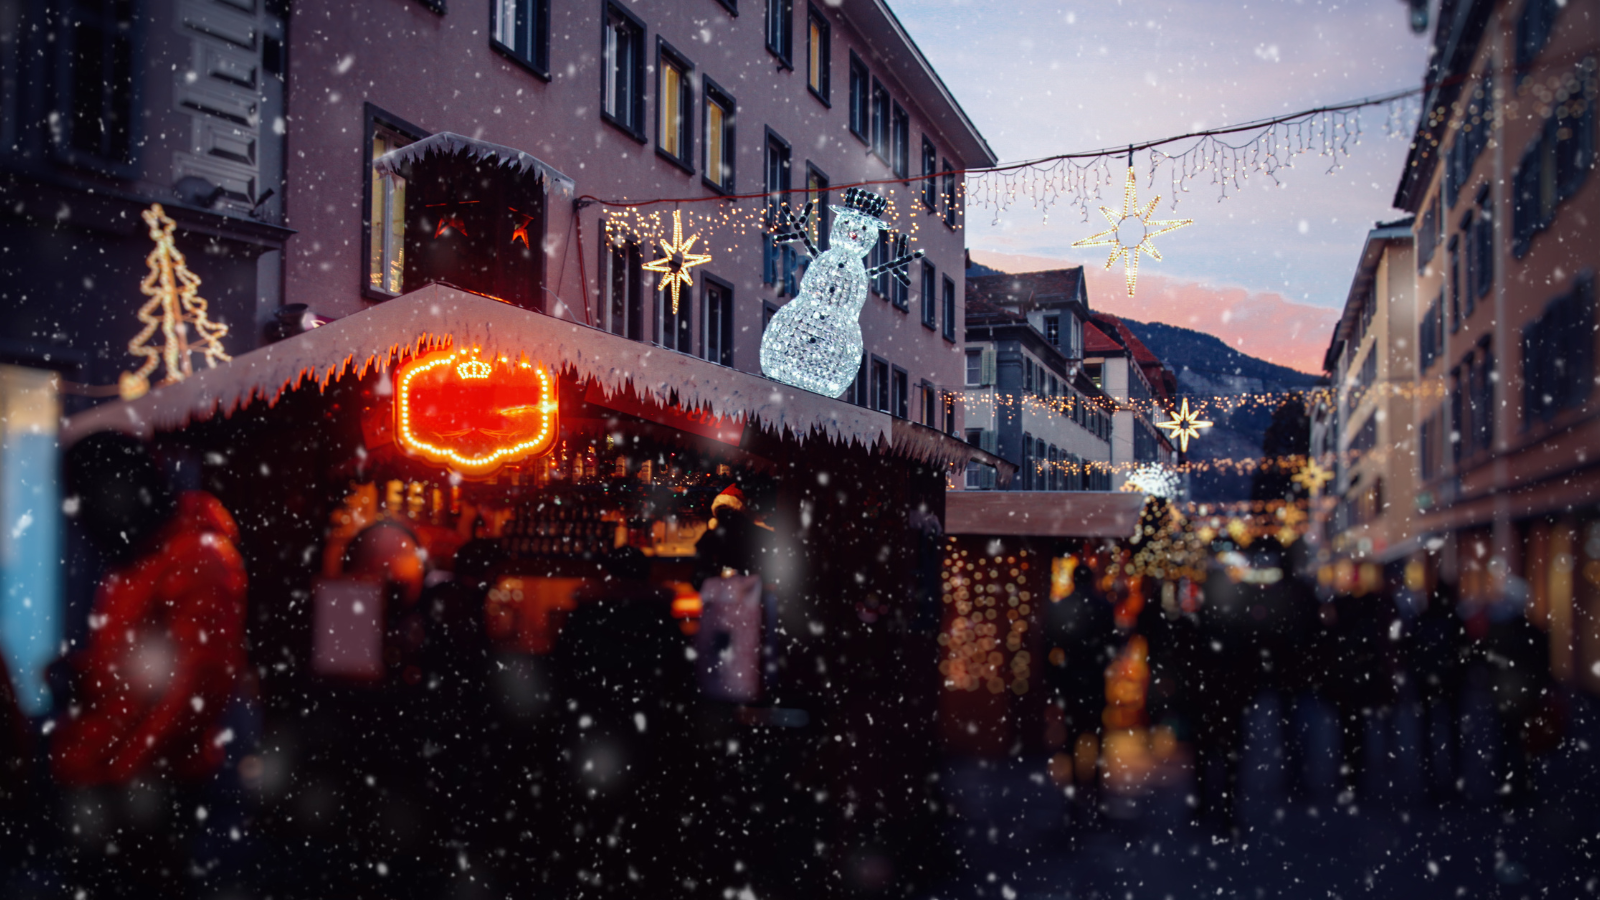 The ninth in the list of 10 best things to do in Switzerland - Visit the Christmas market